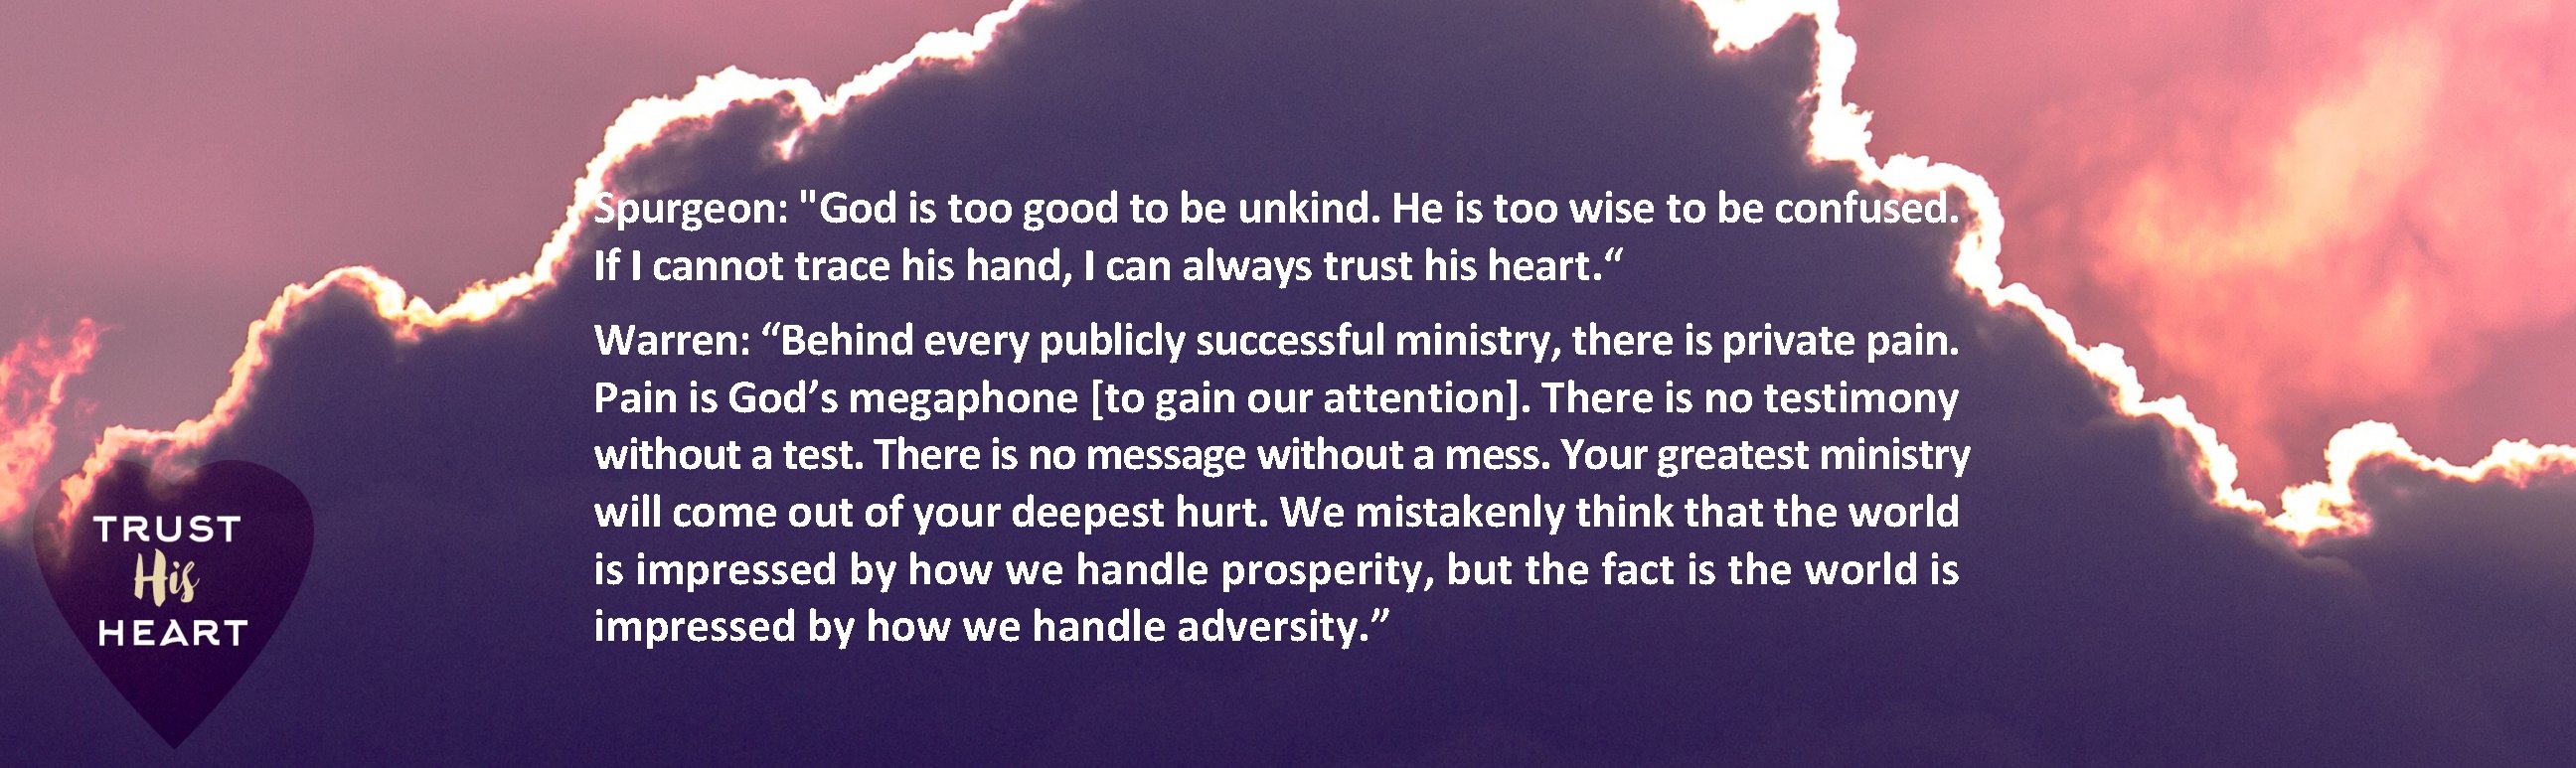 Spurgeon: "God is too good to be unkind. He is too wise to be